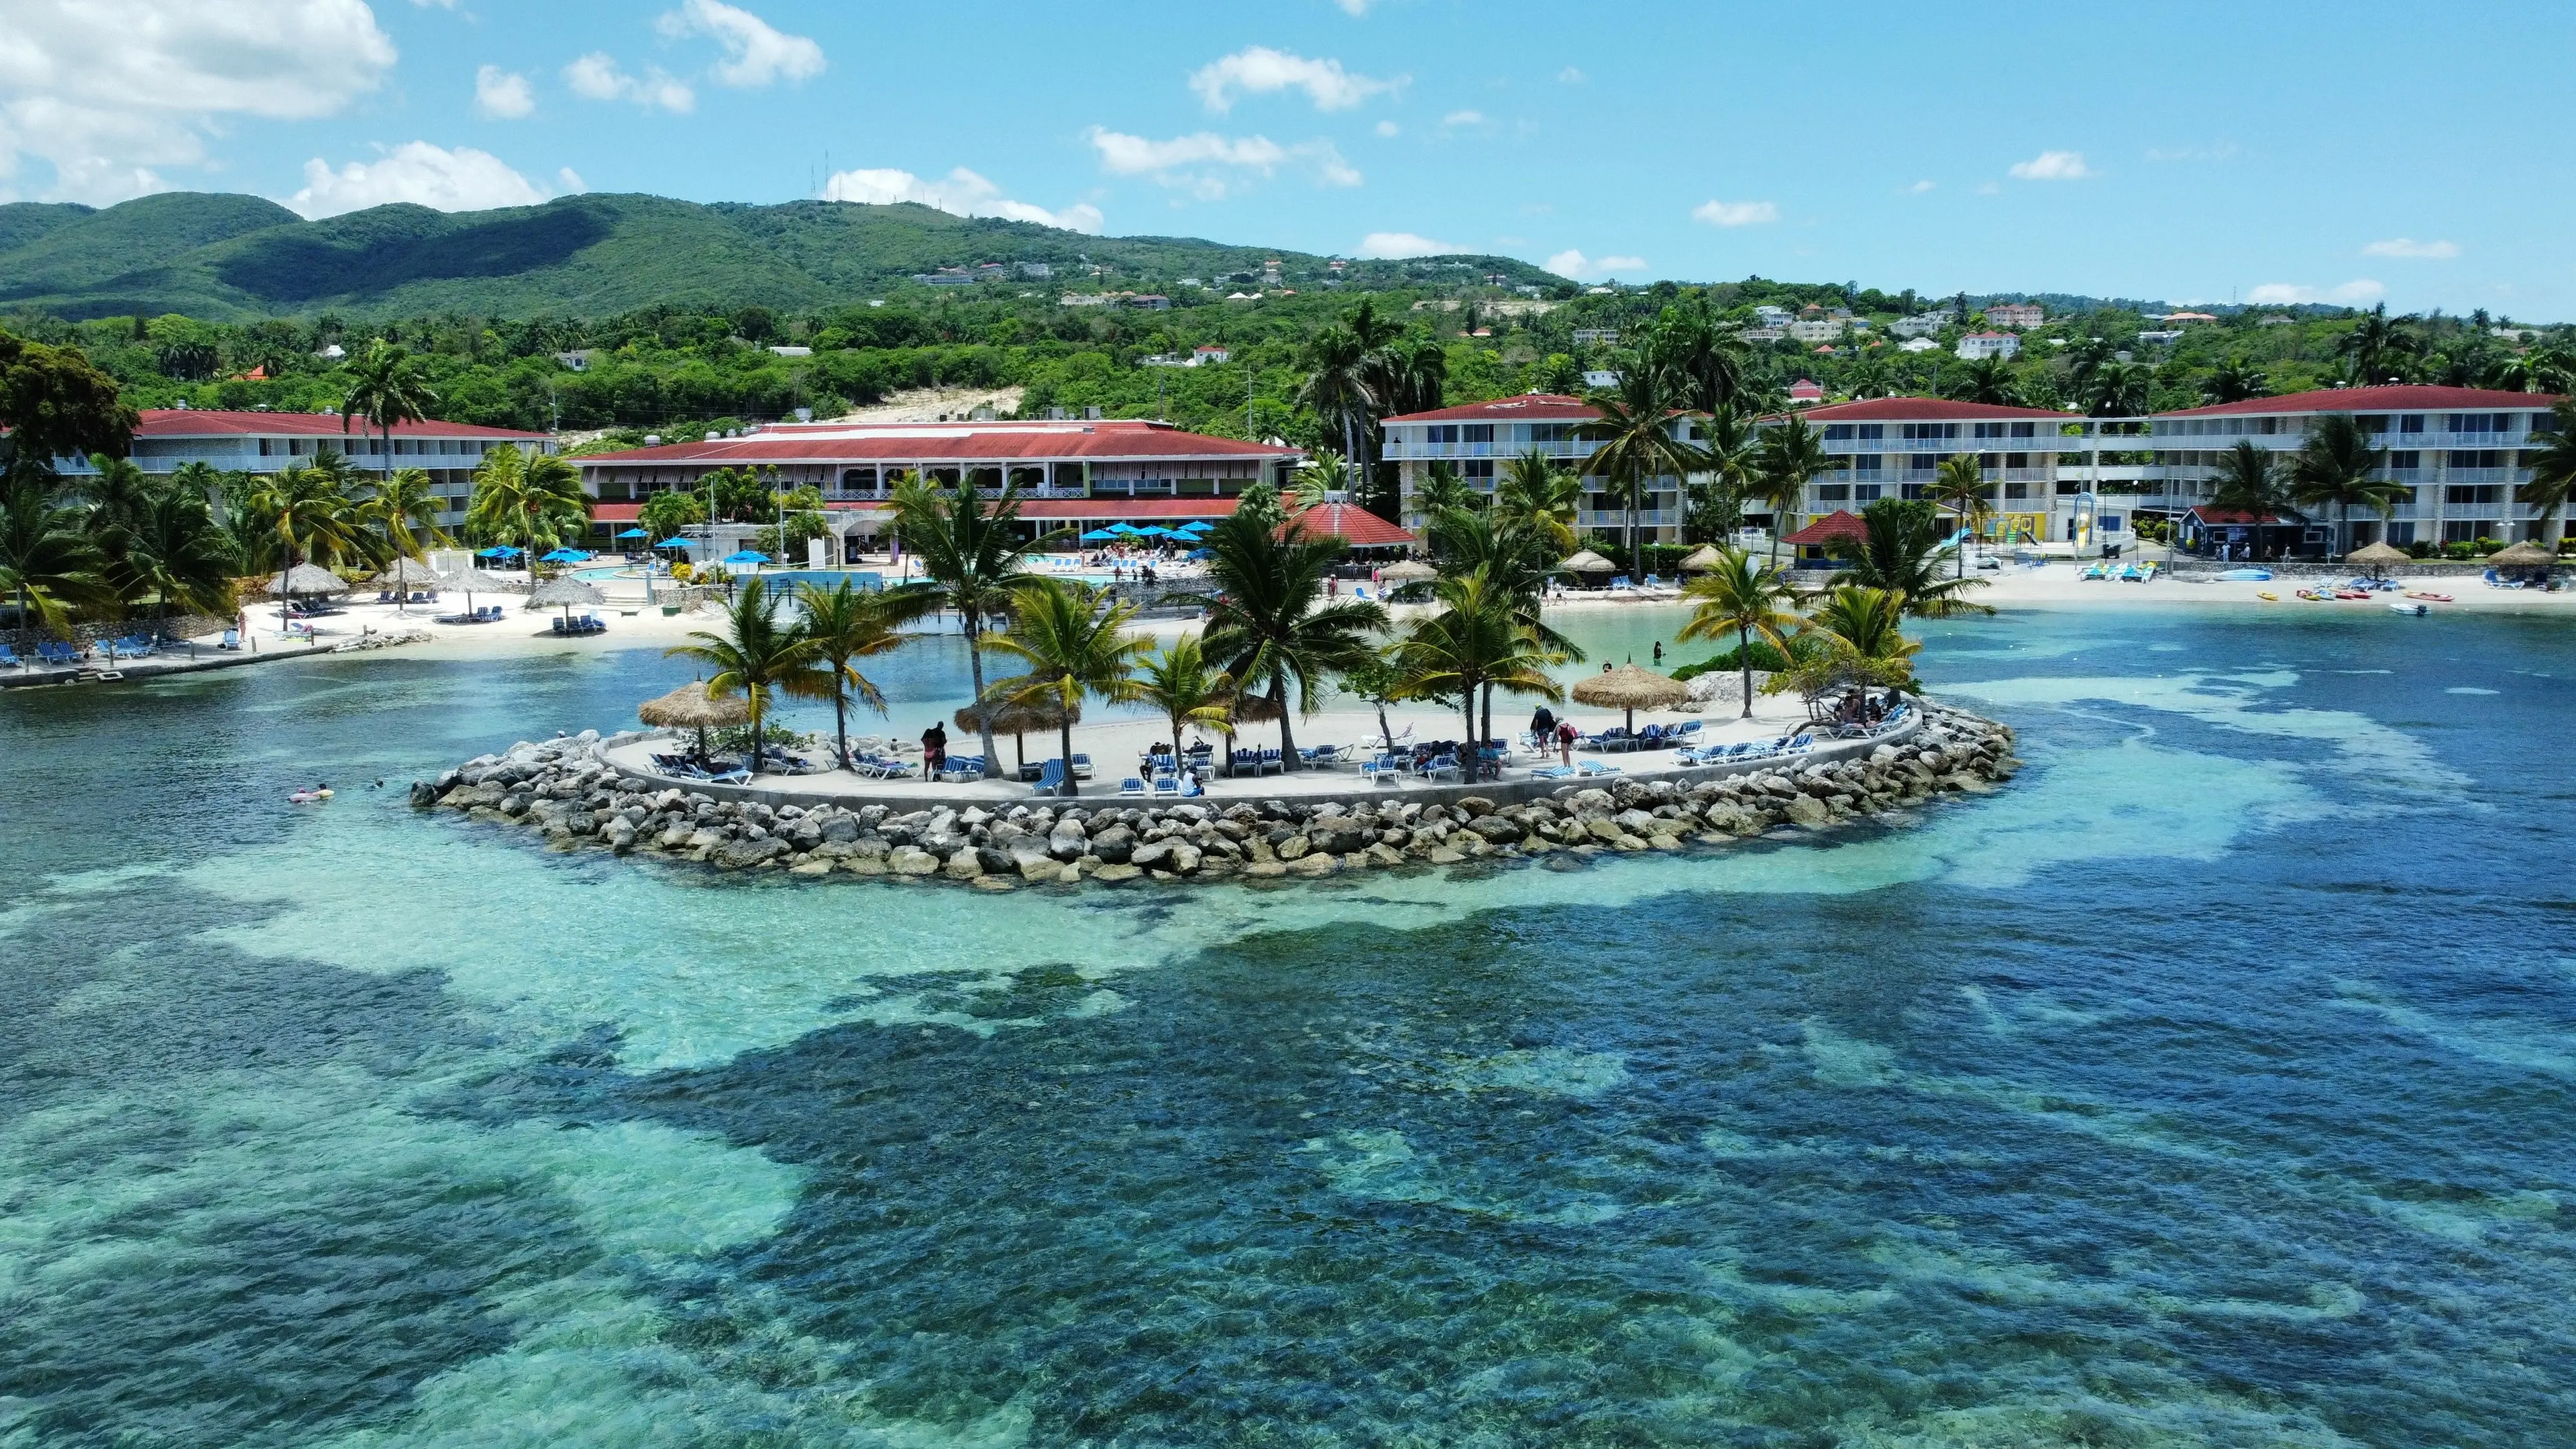 2-Day Adventure Itinerary in Montego Bay, Jamaica